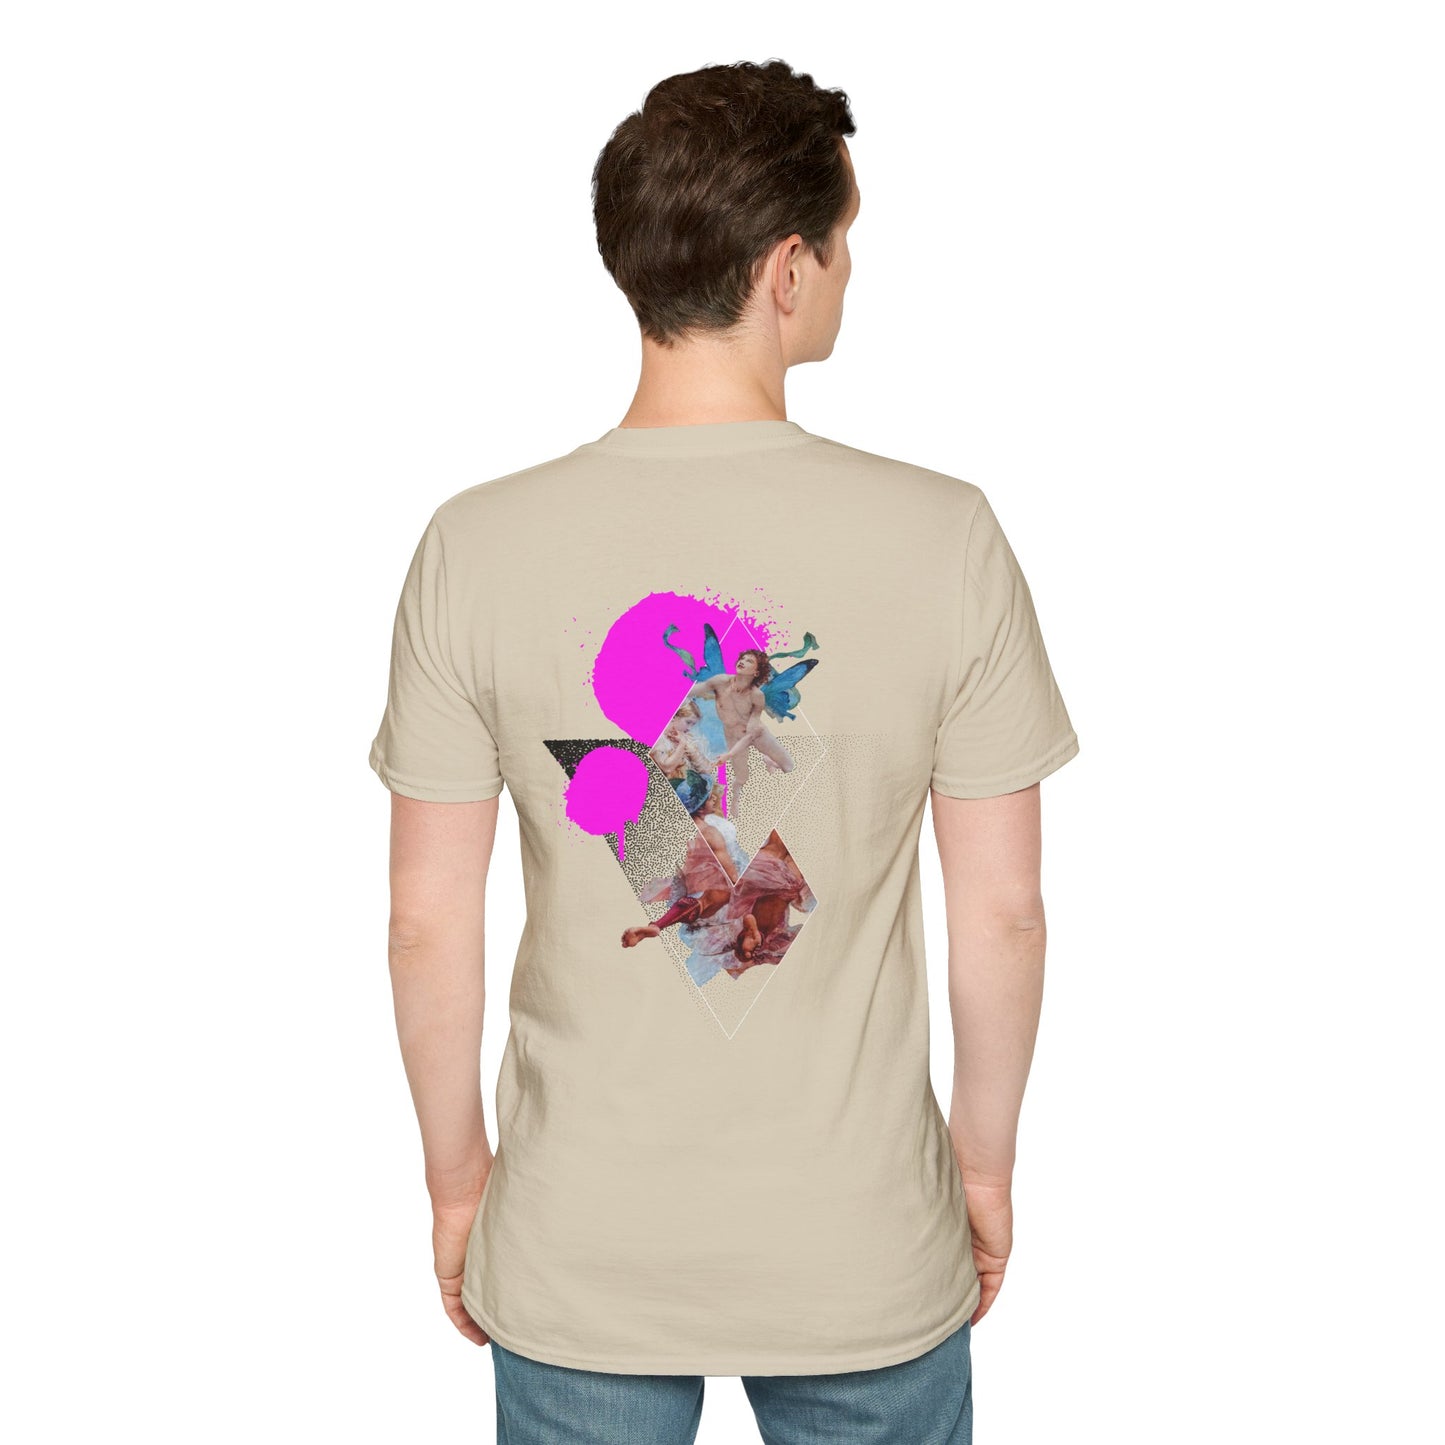 Ecru T-shirt with a surreal collage of butterflies in spray paint design